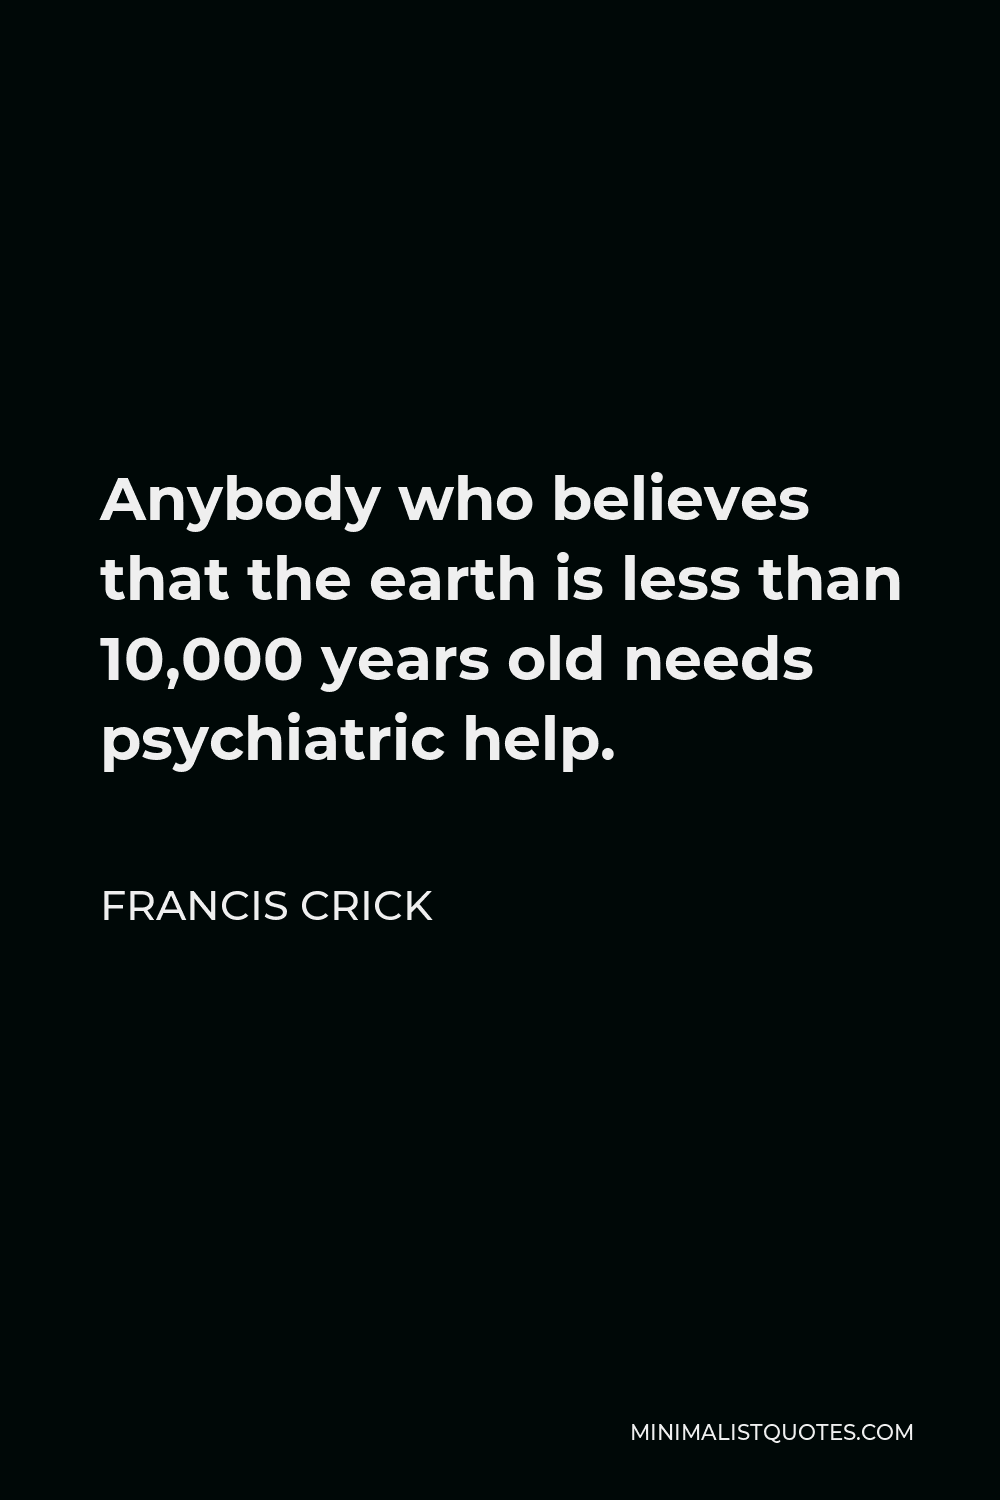 Francis Crick Quote - Anybody who believes that the earth is less than 10,000 years old needs psychiatric help.